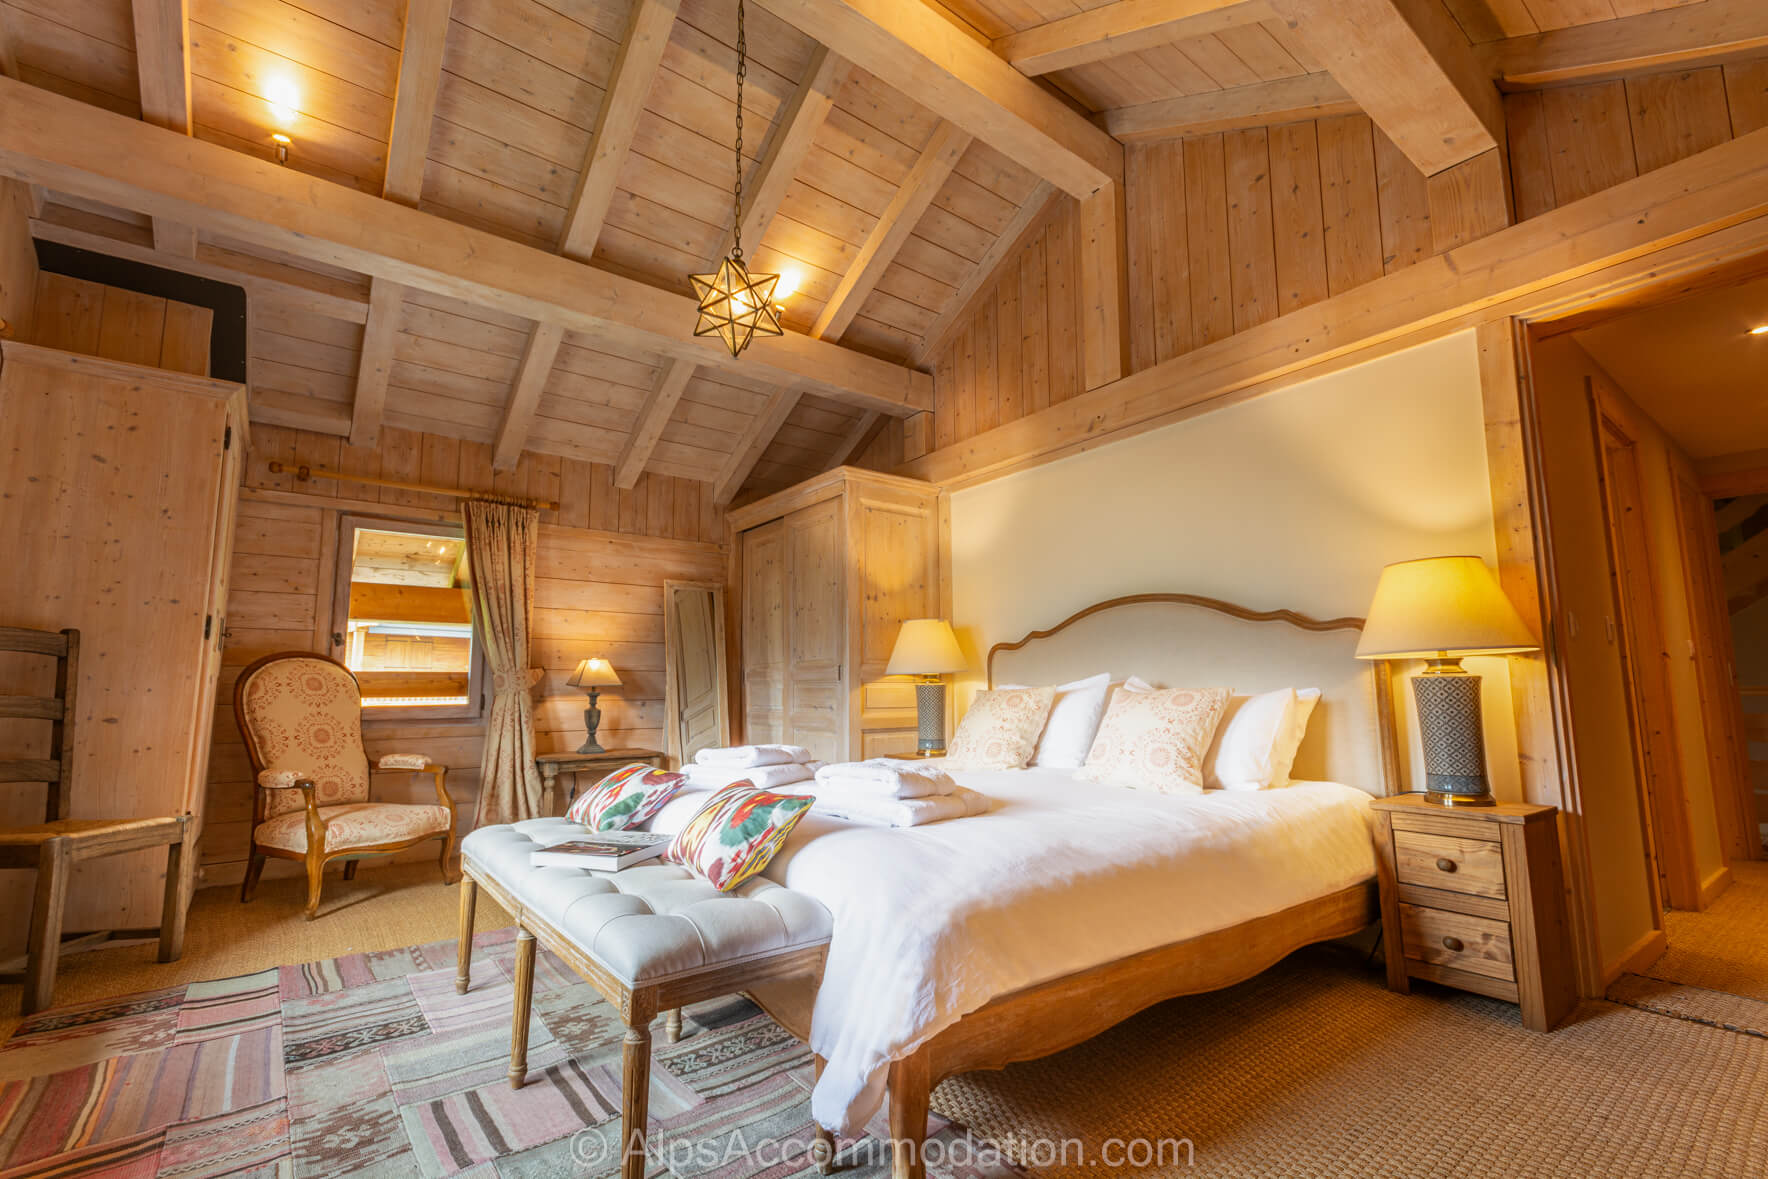 Chalet Gentiane Bleue Samoëns - Enjoy the master king size bedroom suite with vaulted ceiling and stunning mountain views